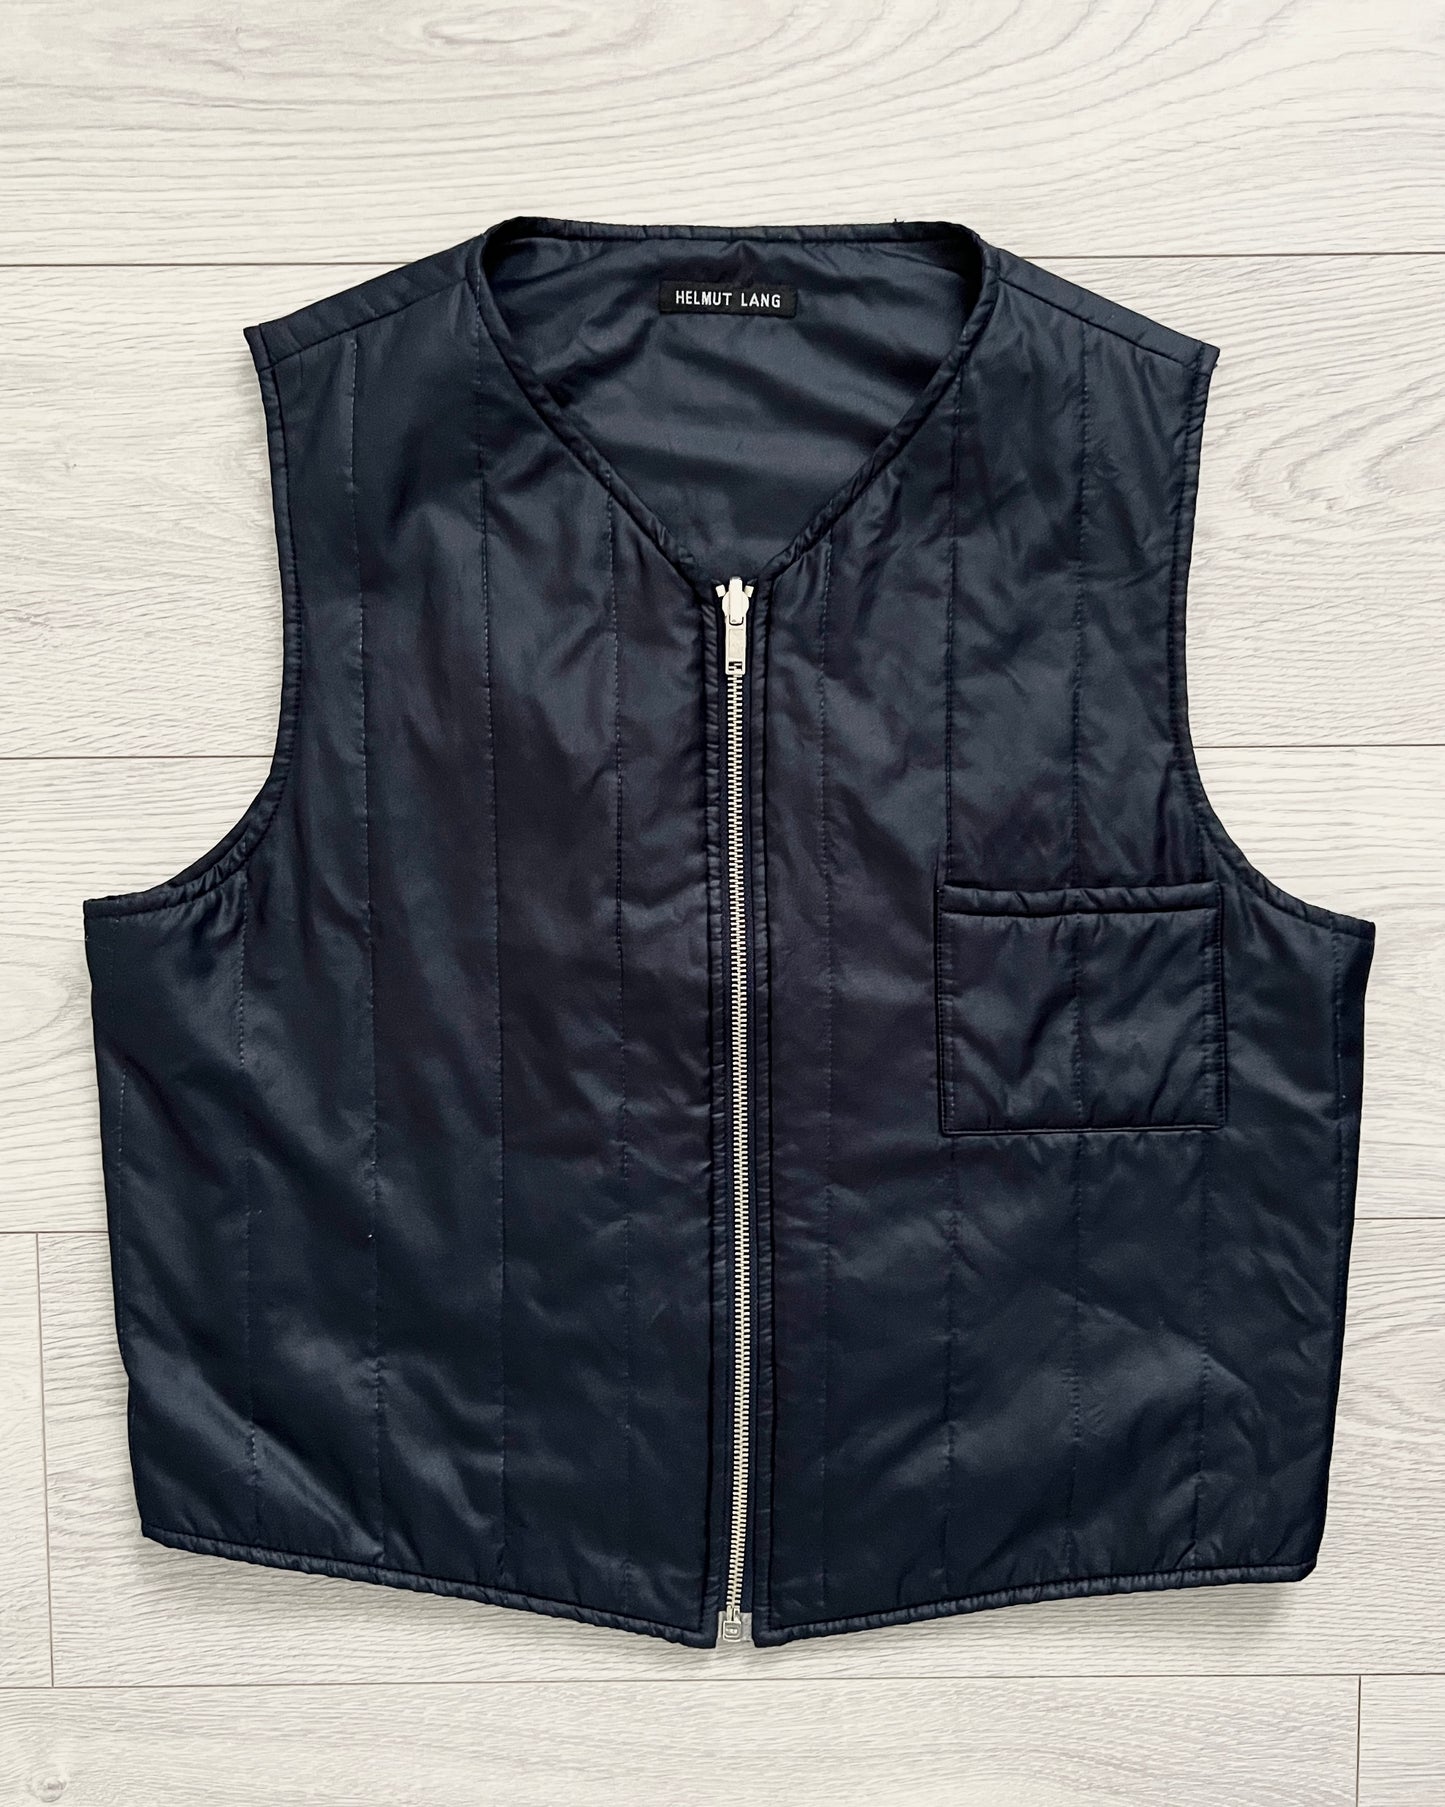 Helmut Lang 90s Insulated Reversible Vest - Size S